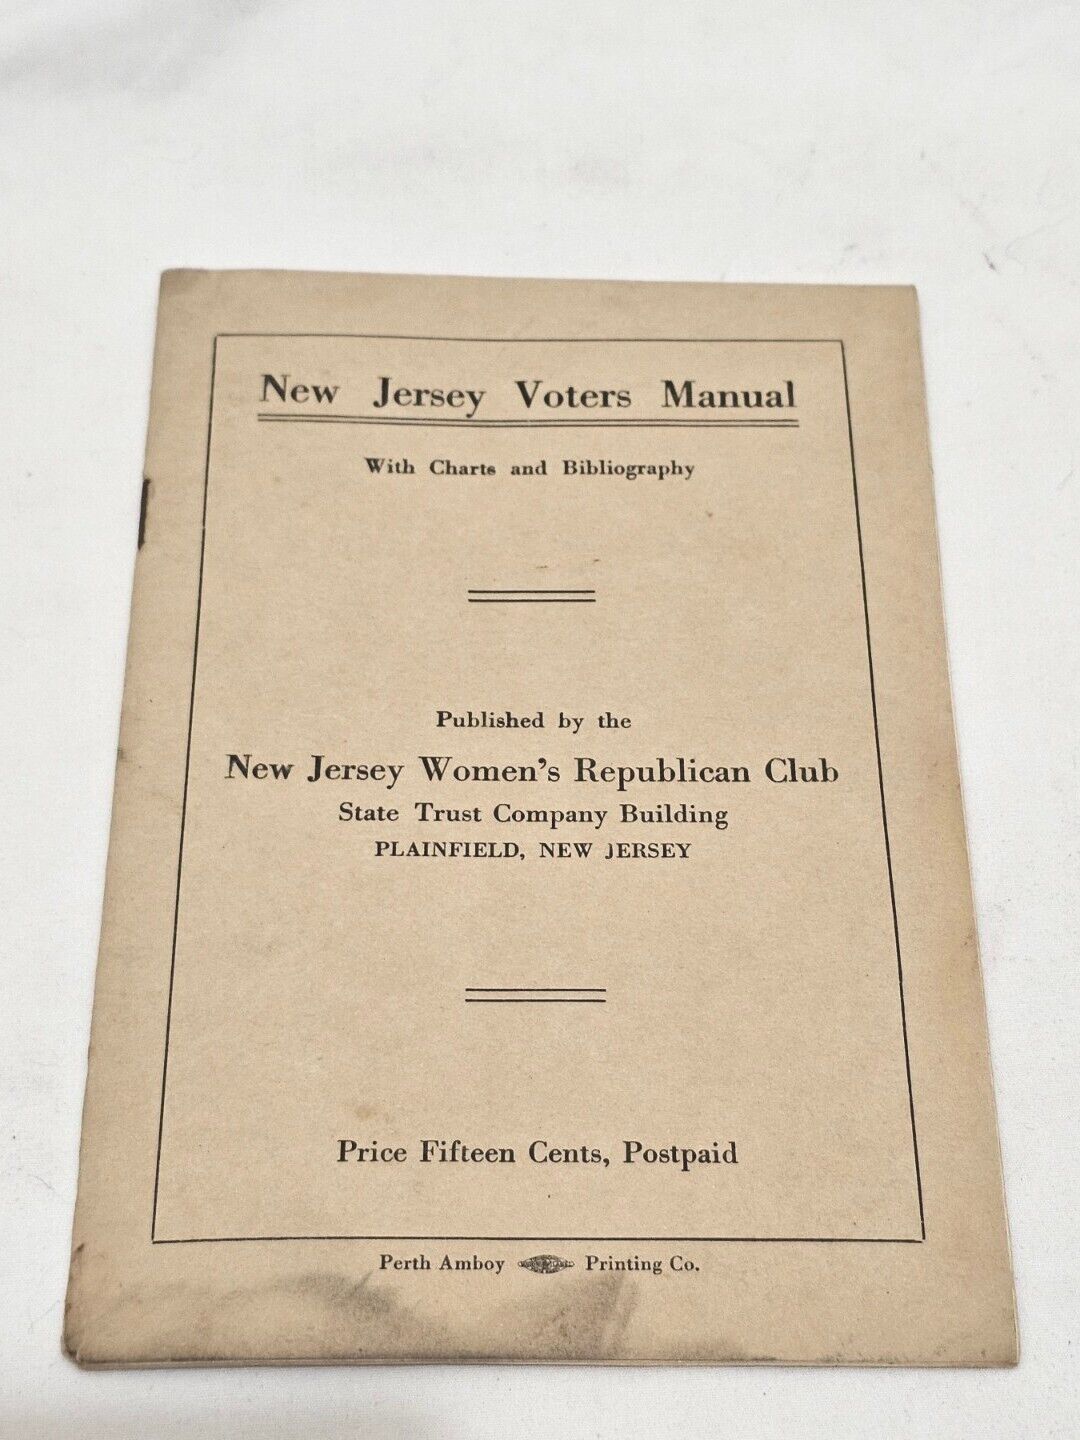 1921 New Jersey Voters Manual Published By New Jersey Women's Republican Club +